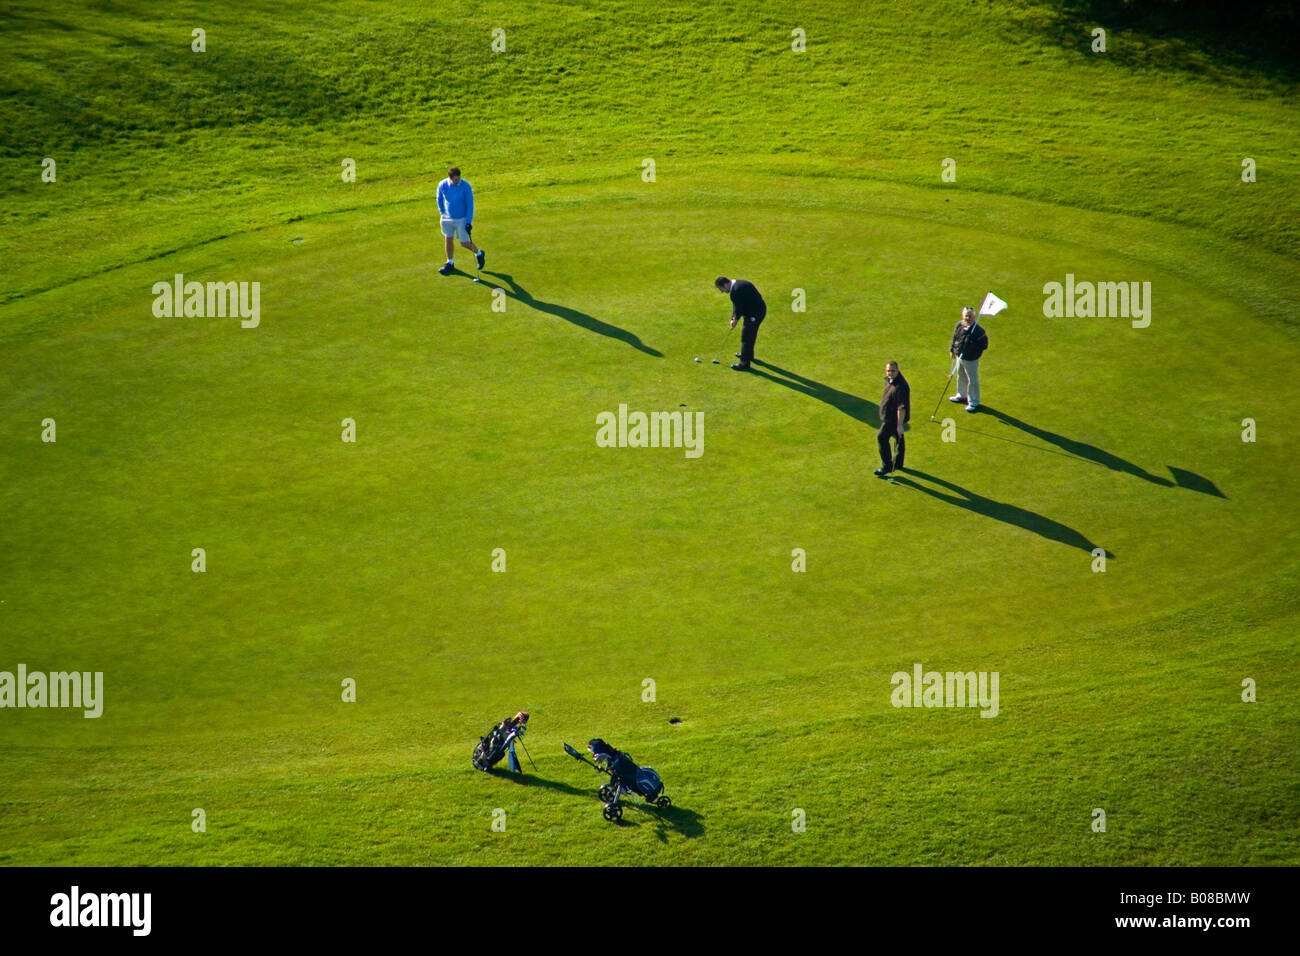 aerial view of golf players on the putting green Stock Photo